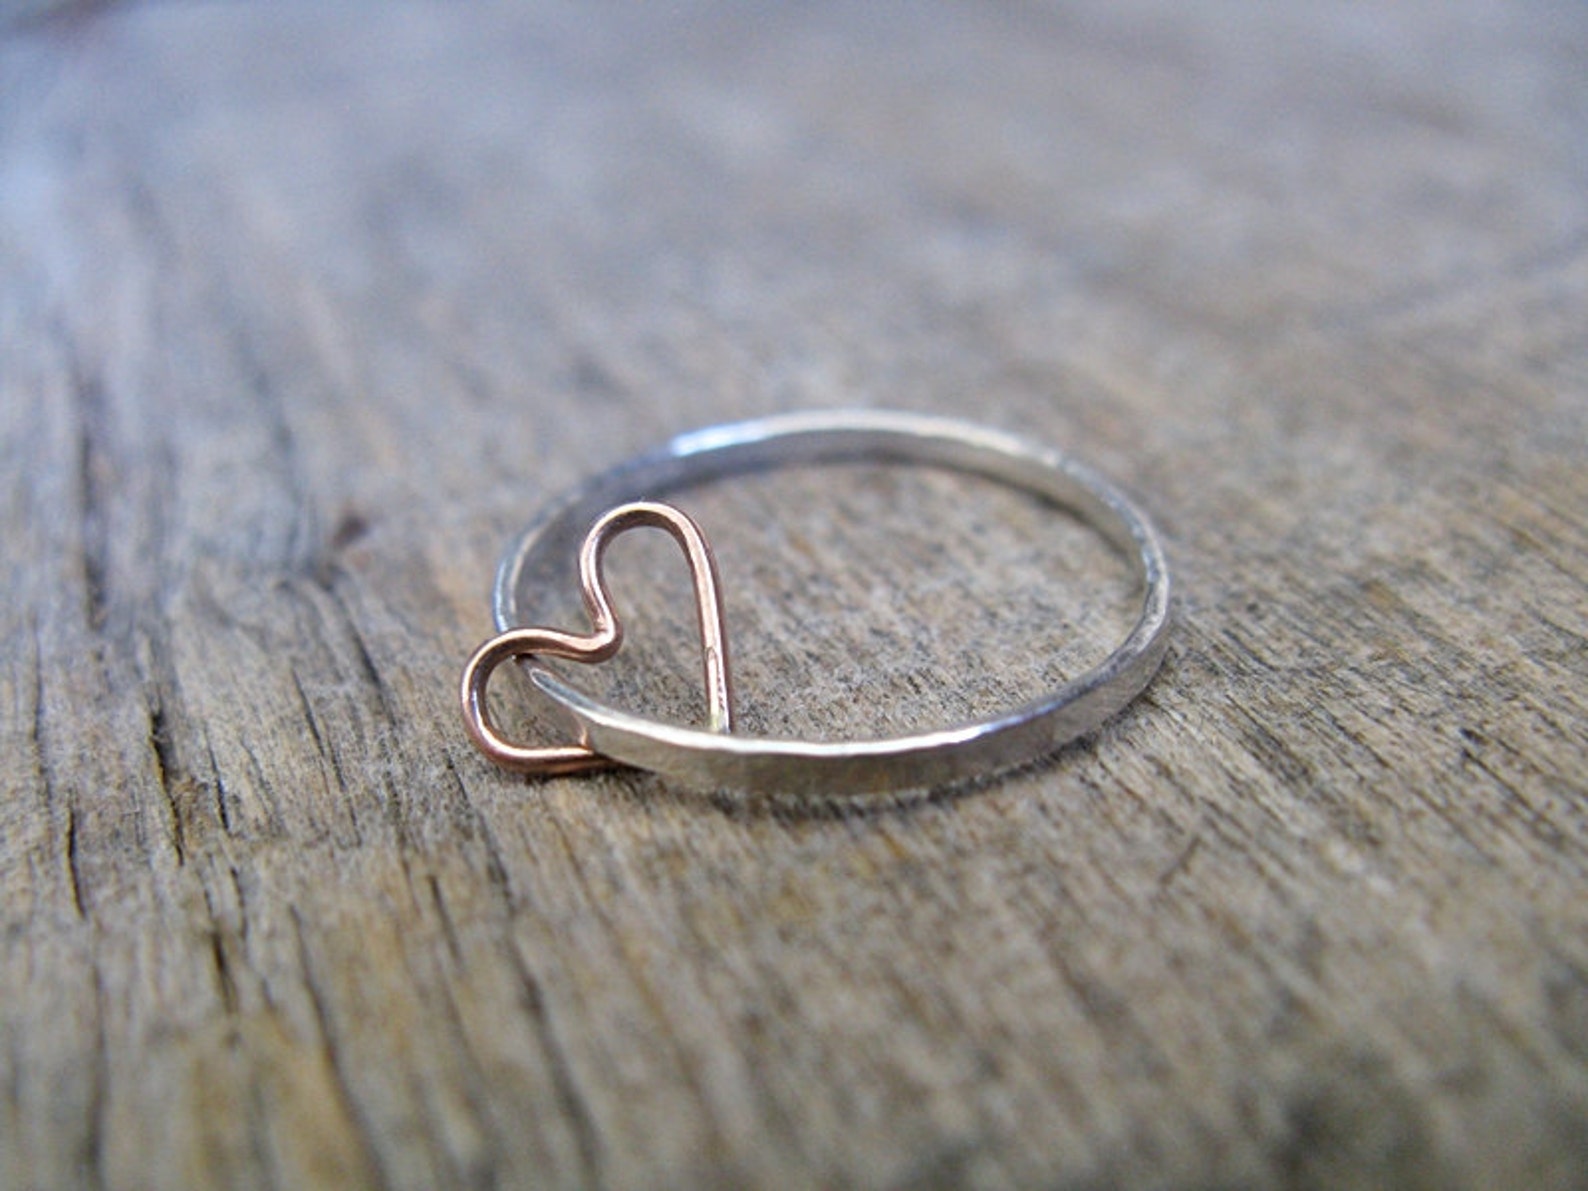 Floating Heart Sterling Silver Stacking Ring | Etsy